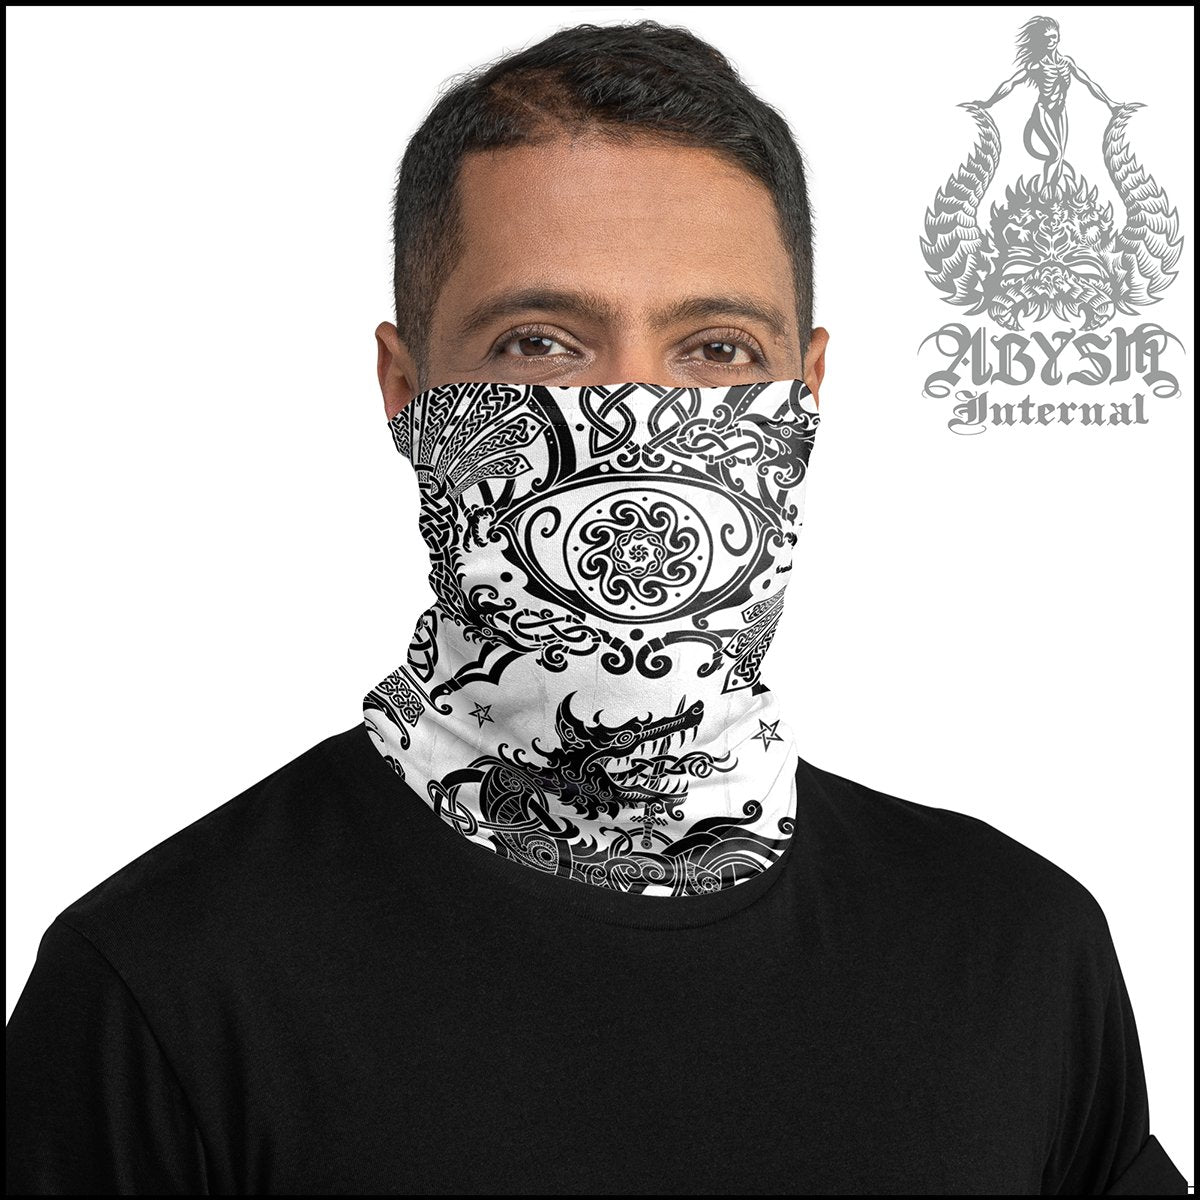 Fenrir Neck Gaiter, Norse Wolf Face Mask, Viking Printed Head Covering, Nordic Art - Black, White and Red, 2 Colors - Abysm Internal